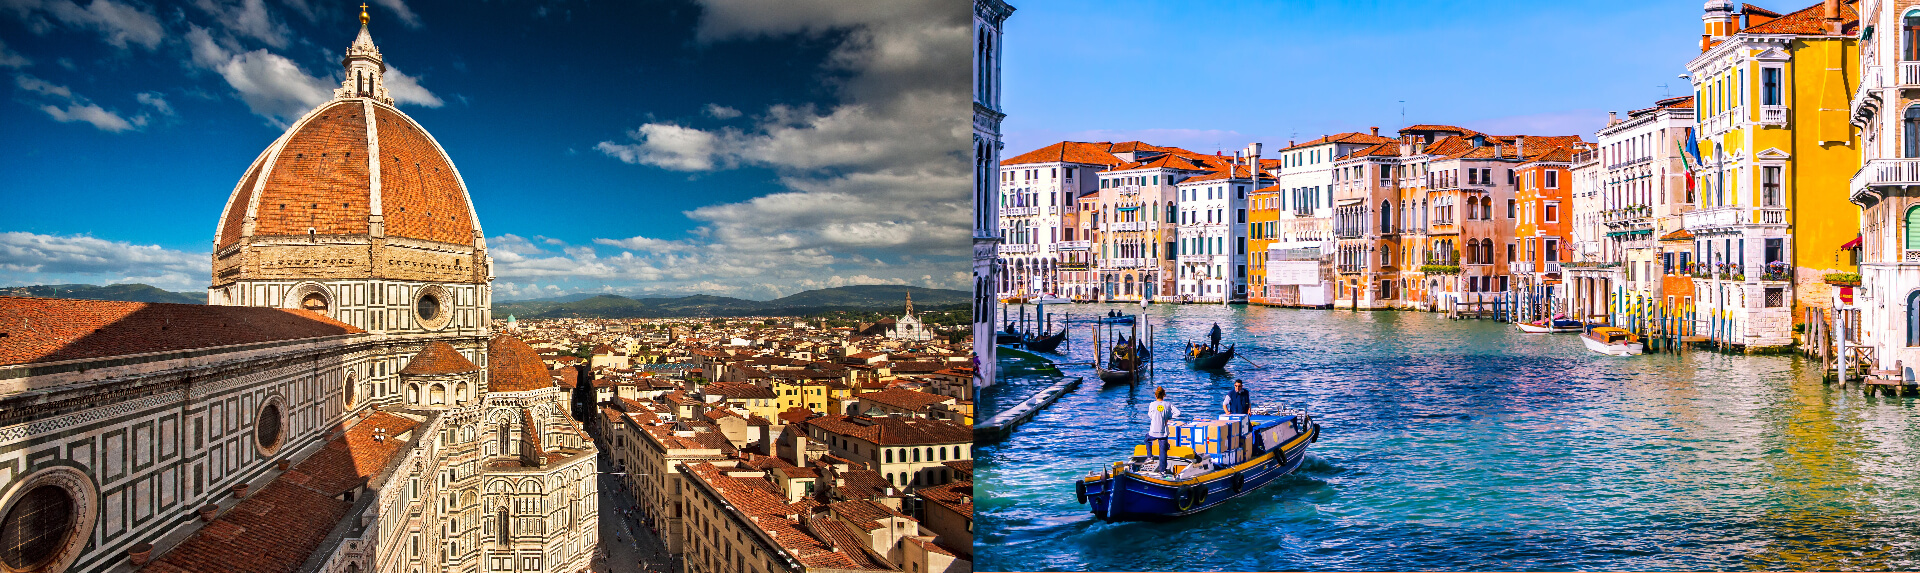 What’s better? Florence or Venice?